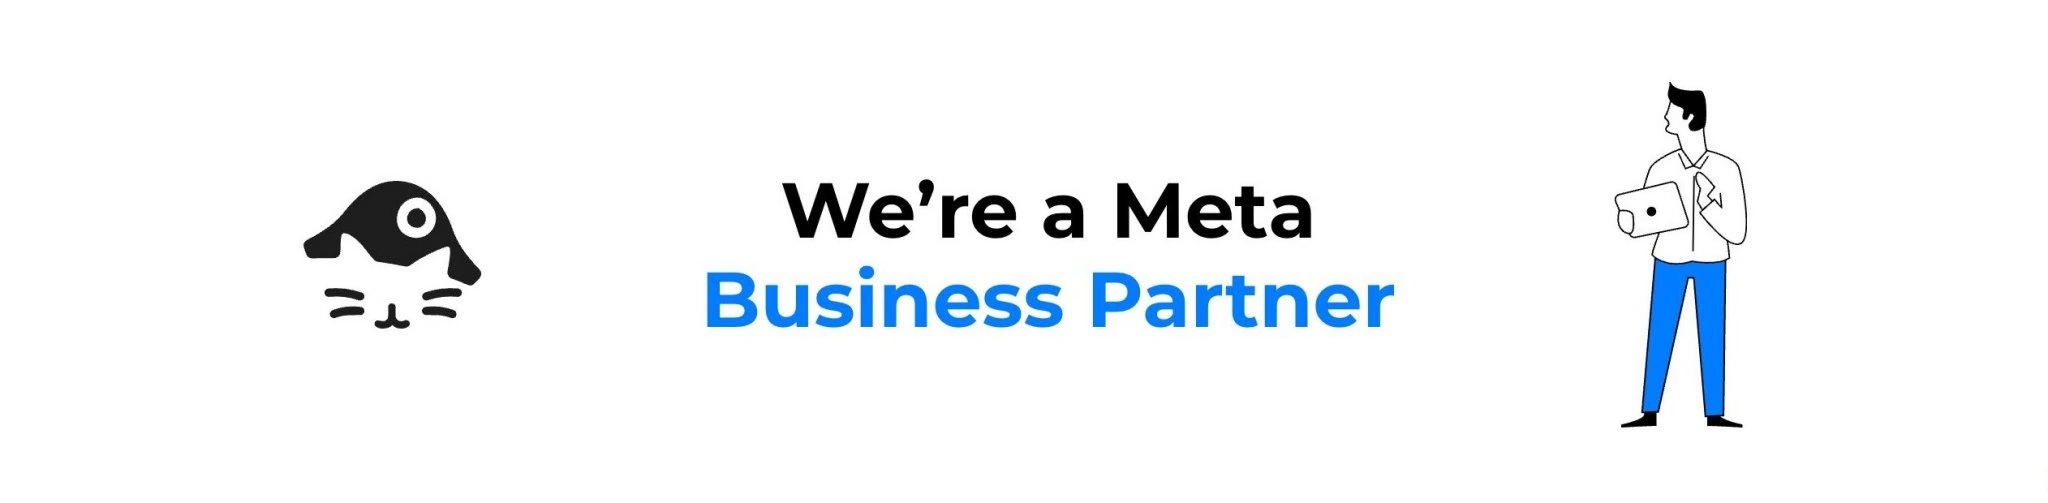 we are a meta business partner